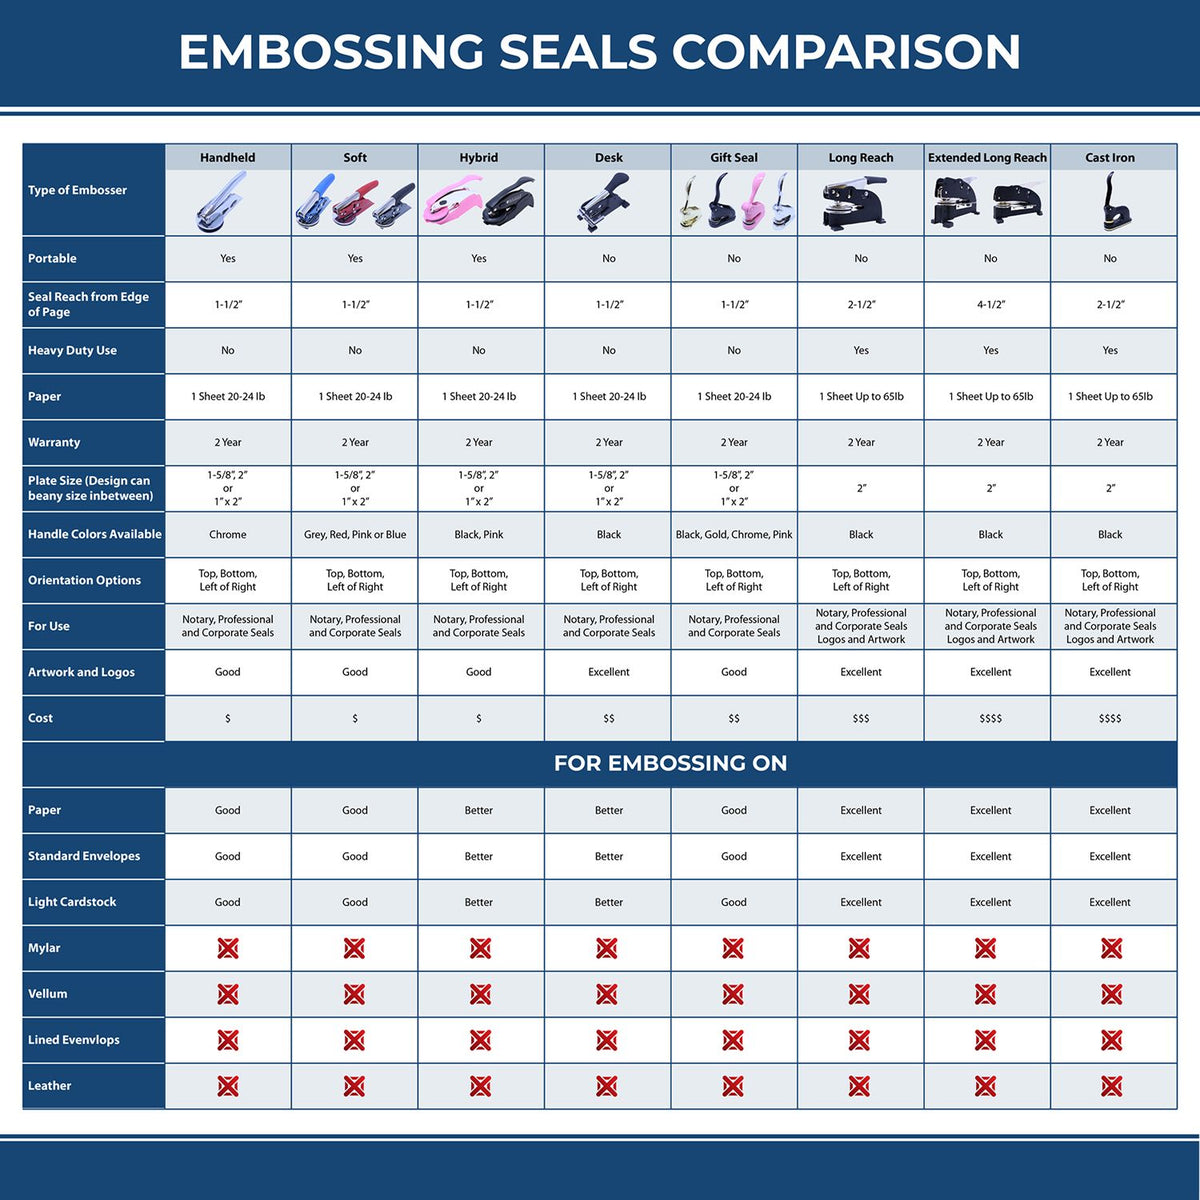 A comparison chart for the different types of mount models available for the Hybrid Michigan Engineer Seal